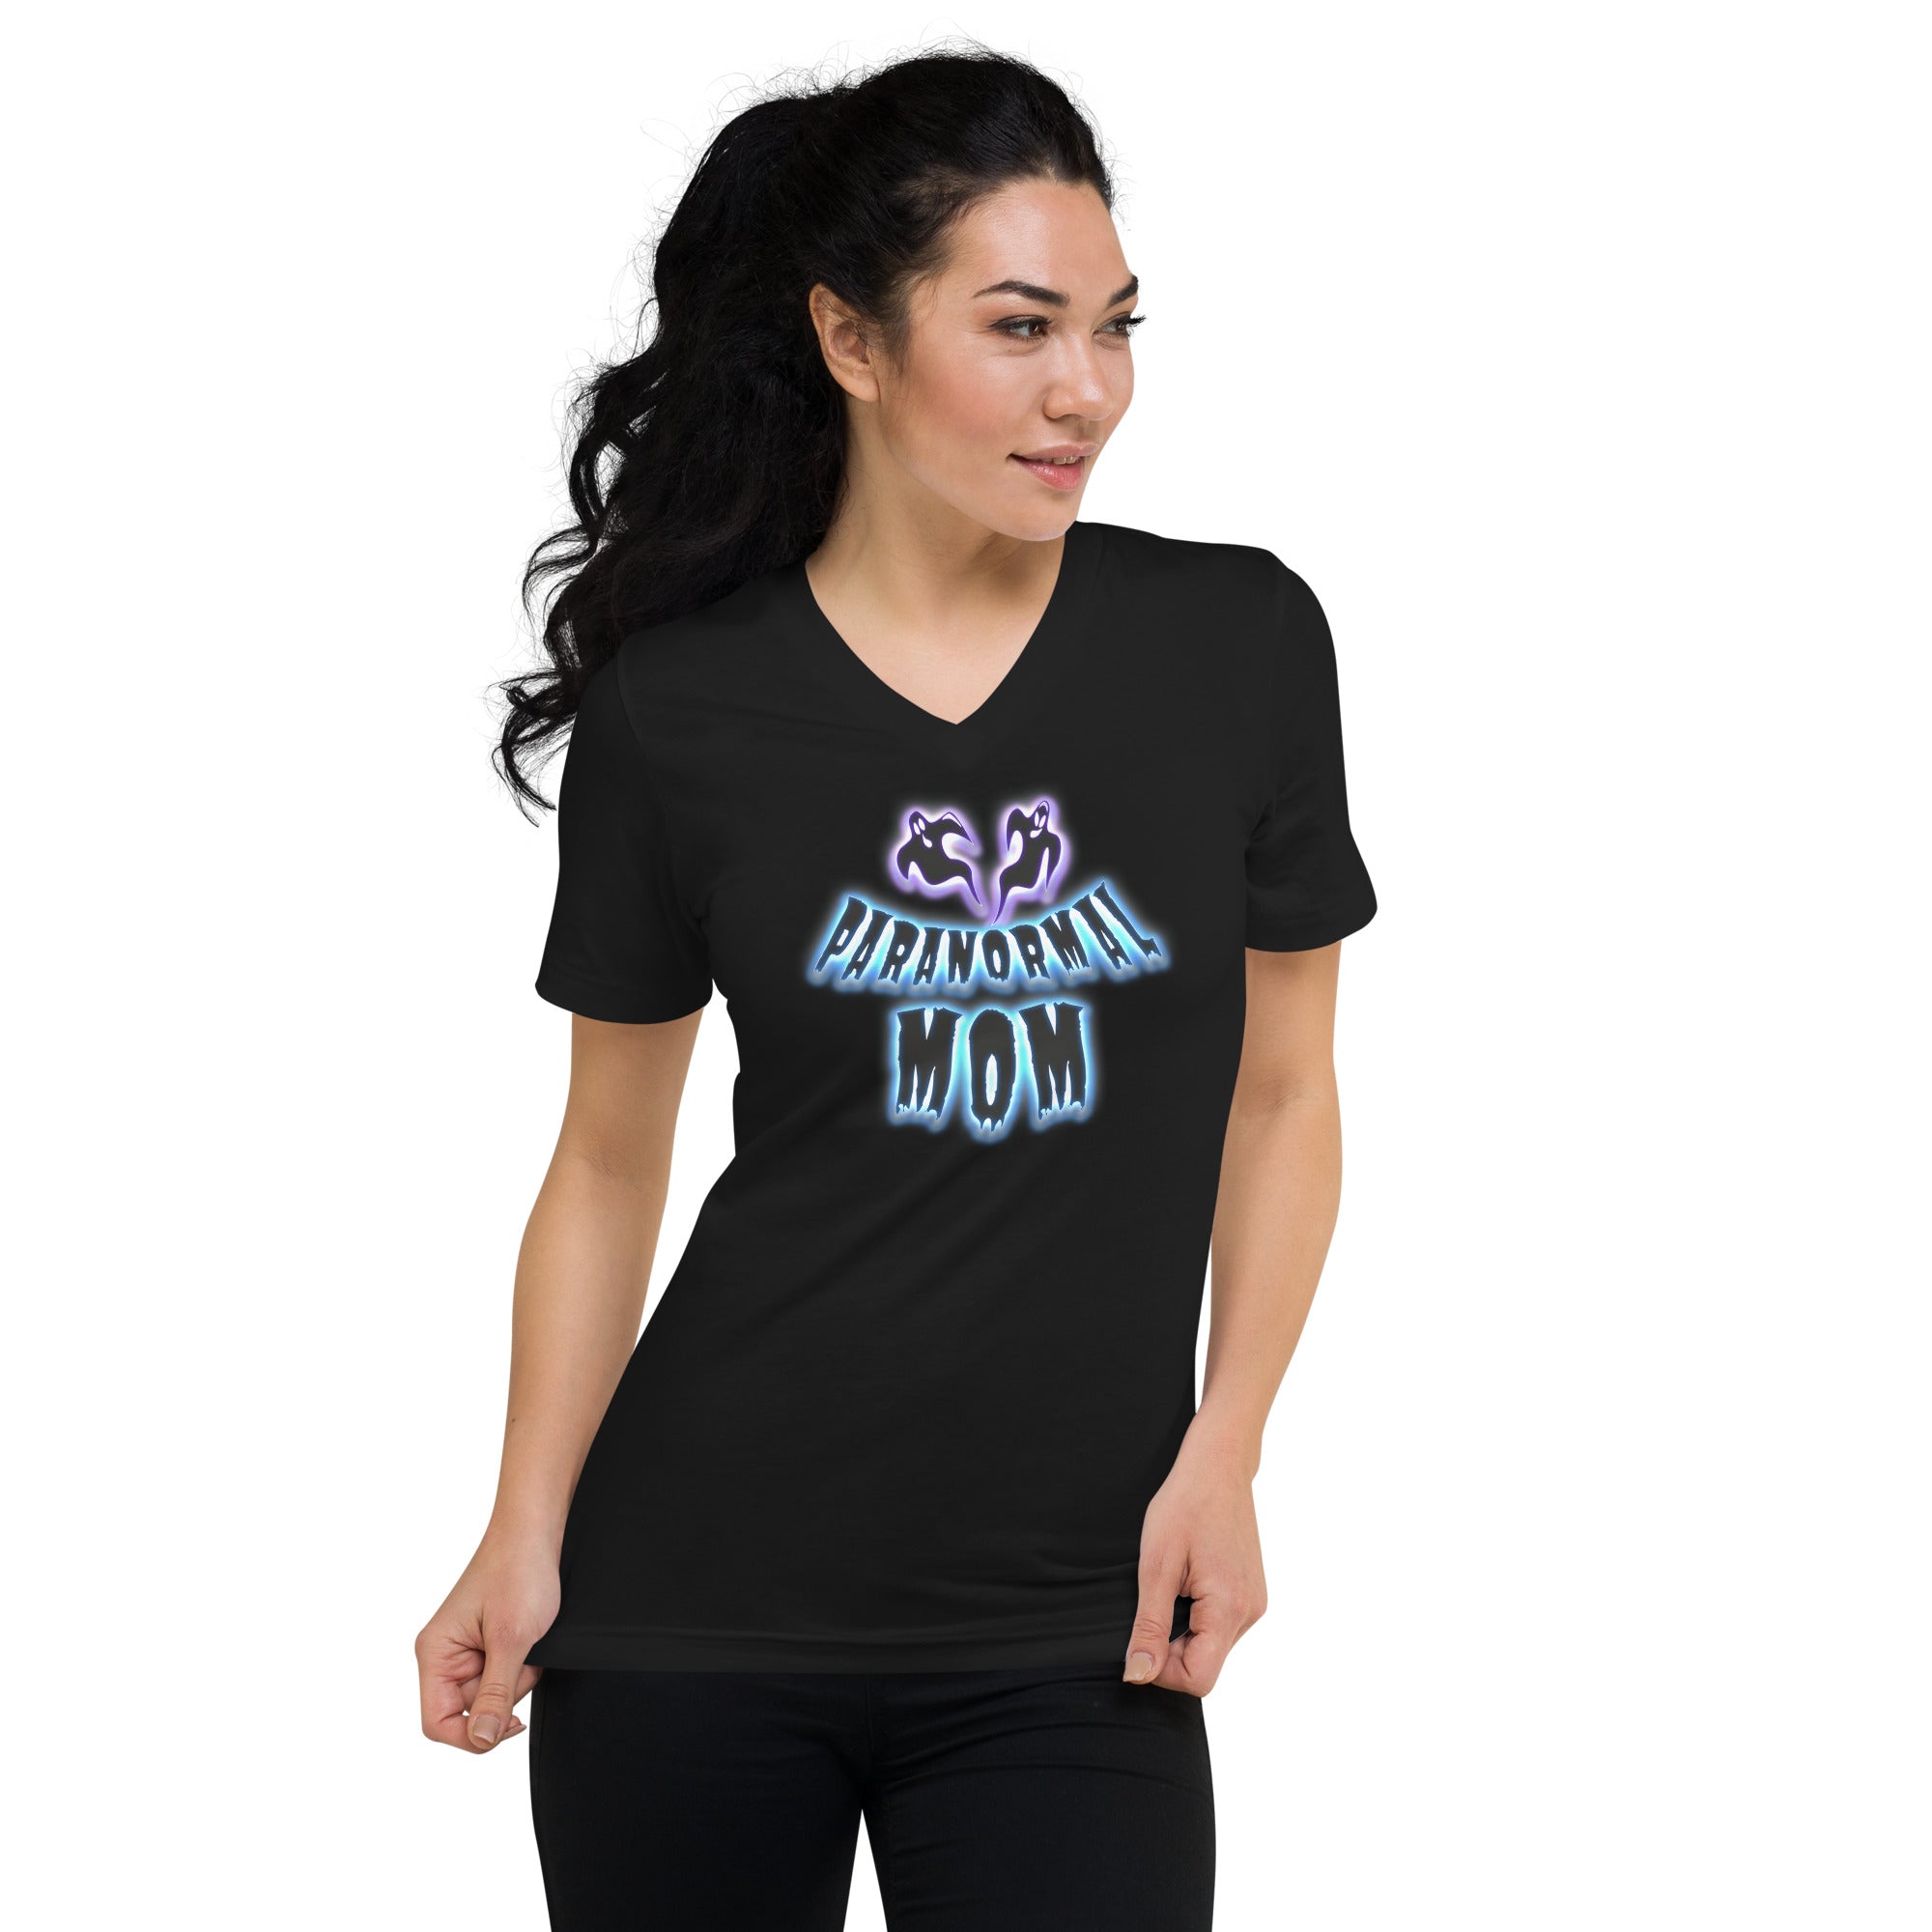 Paranormal Ghost Mom Poltergeist Mother's Day Short Sleeve V-Neck T-Shirt